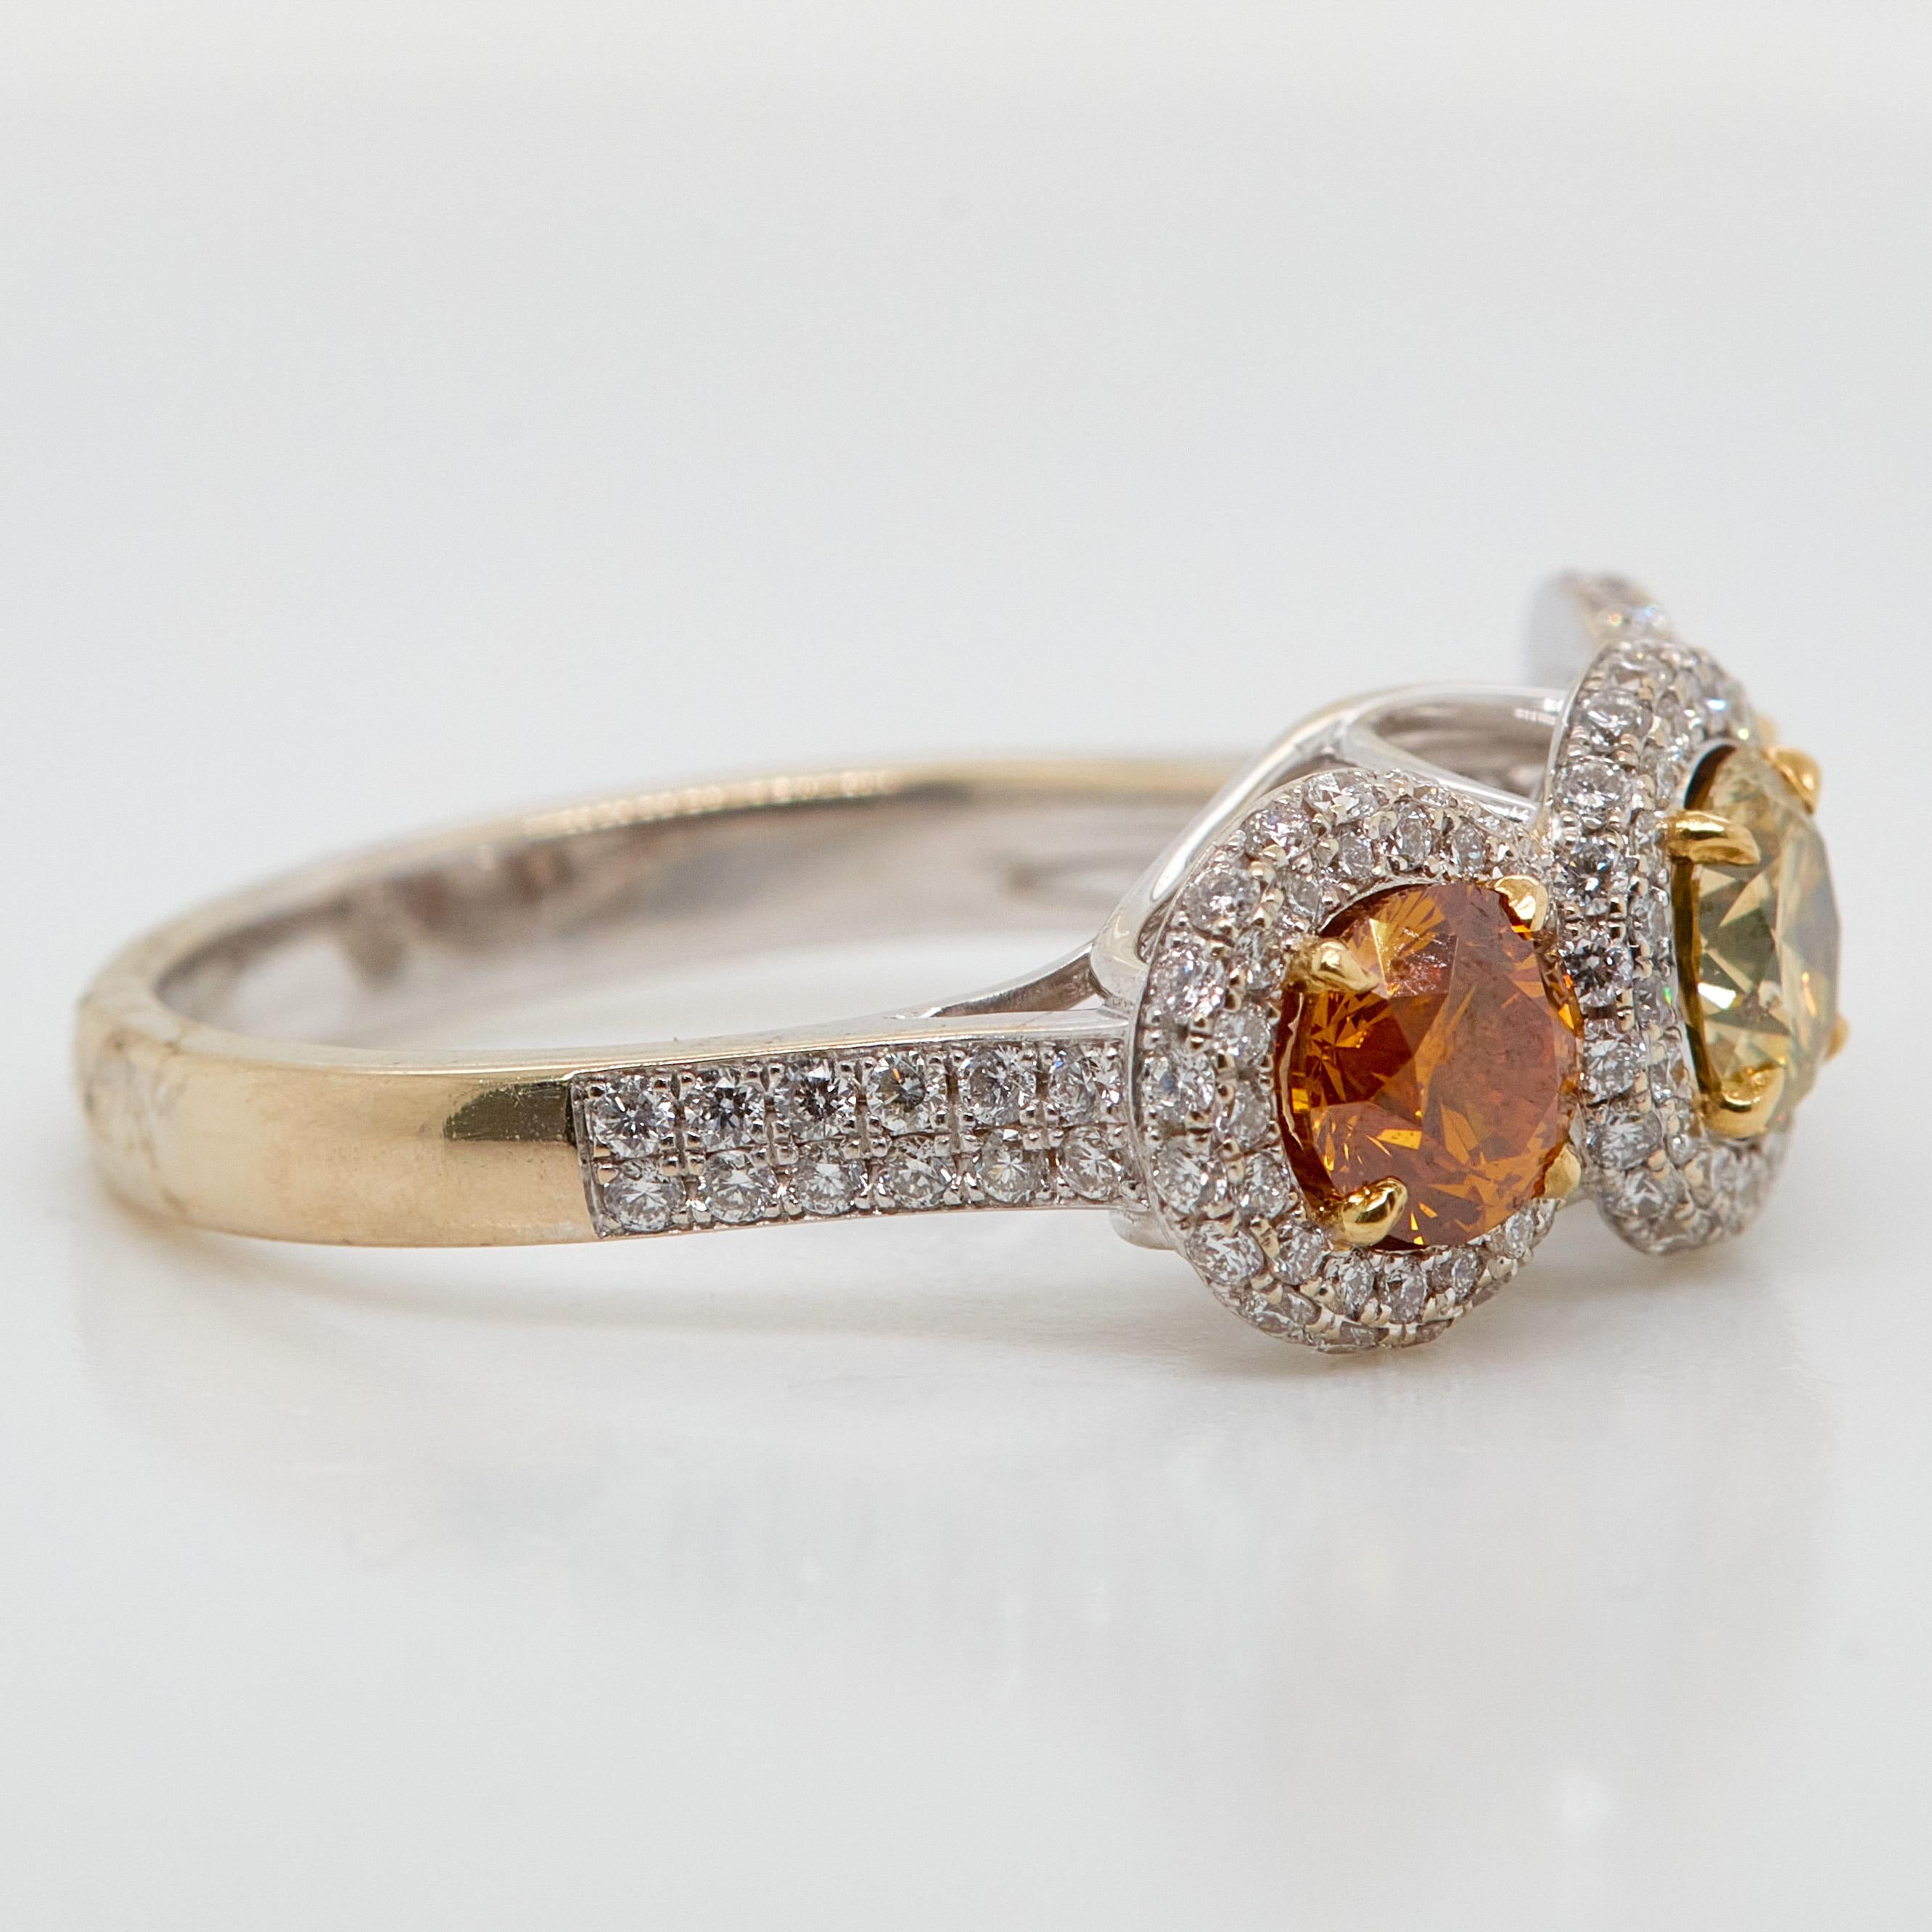 Circles of diamonds in timeless elegance. This ring set with three GIA certified natural fancy color diamonds. A 0.63 carat circular-cut fancy deep brownish yellow diamond, flanked by a 0.60 carat similarly-cut fancy deep yellowish orange diamond